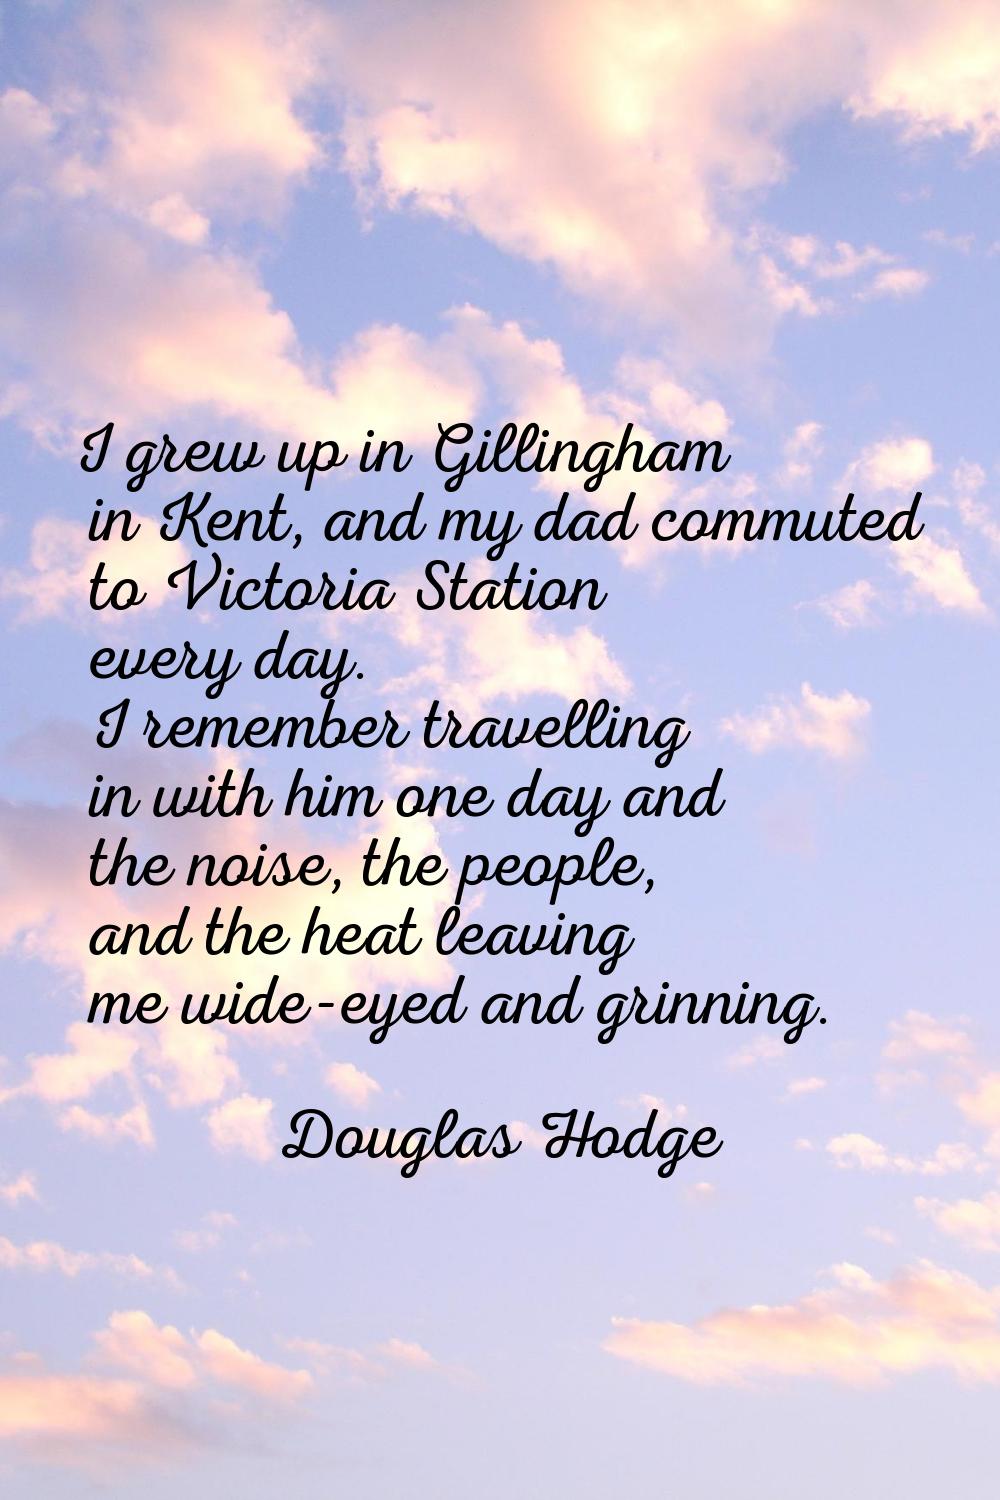 I grew up in Gillingham in Kent, and my dad commuted to Victoria Station every day. I remember trav